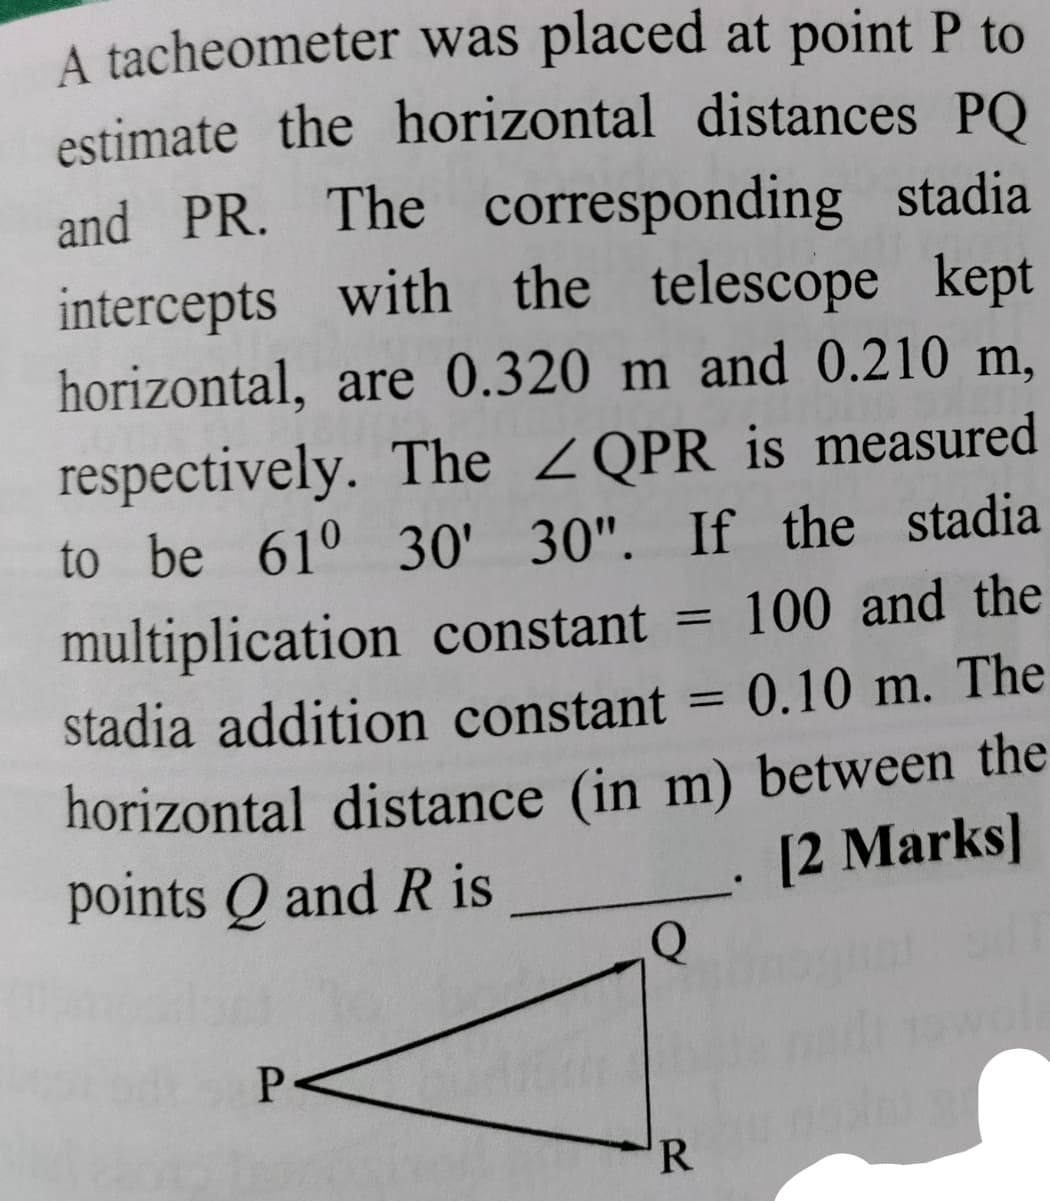 A tacheometer was placed at point P to
estimate the horizontal distances PQ
and PR. The corresponding stadia
intercepts with the telescope kept
horizontal, are 0.320 m and 0.210 m,
respectively. The ZQPR is measured
to be 61° 30' 30". If the stadia
multiplication constant =
100 and the
%3D
stadia addition constant =
0.10 m. The
horizontal distance (in m) between the
points Q and R is
[2 Marks]
P
R.
